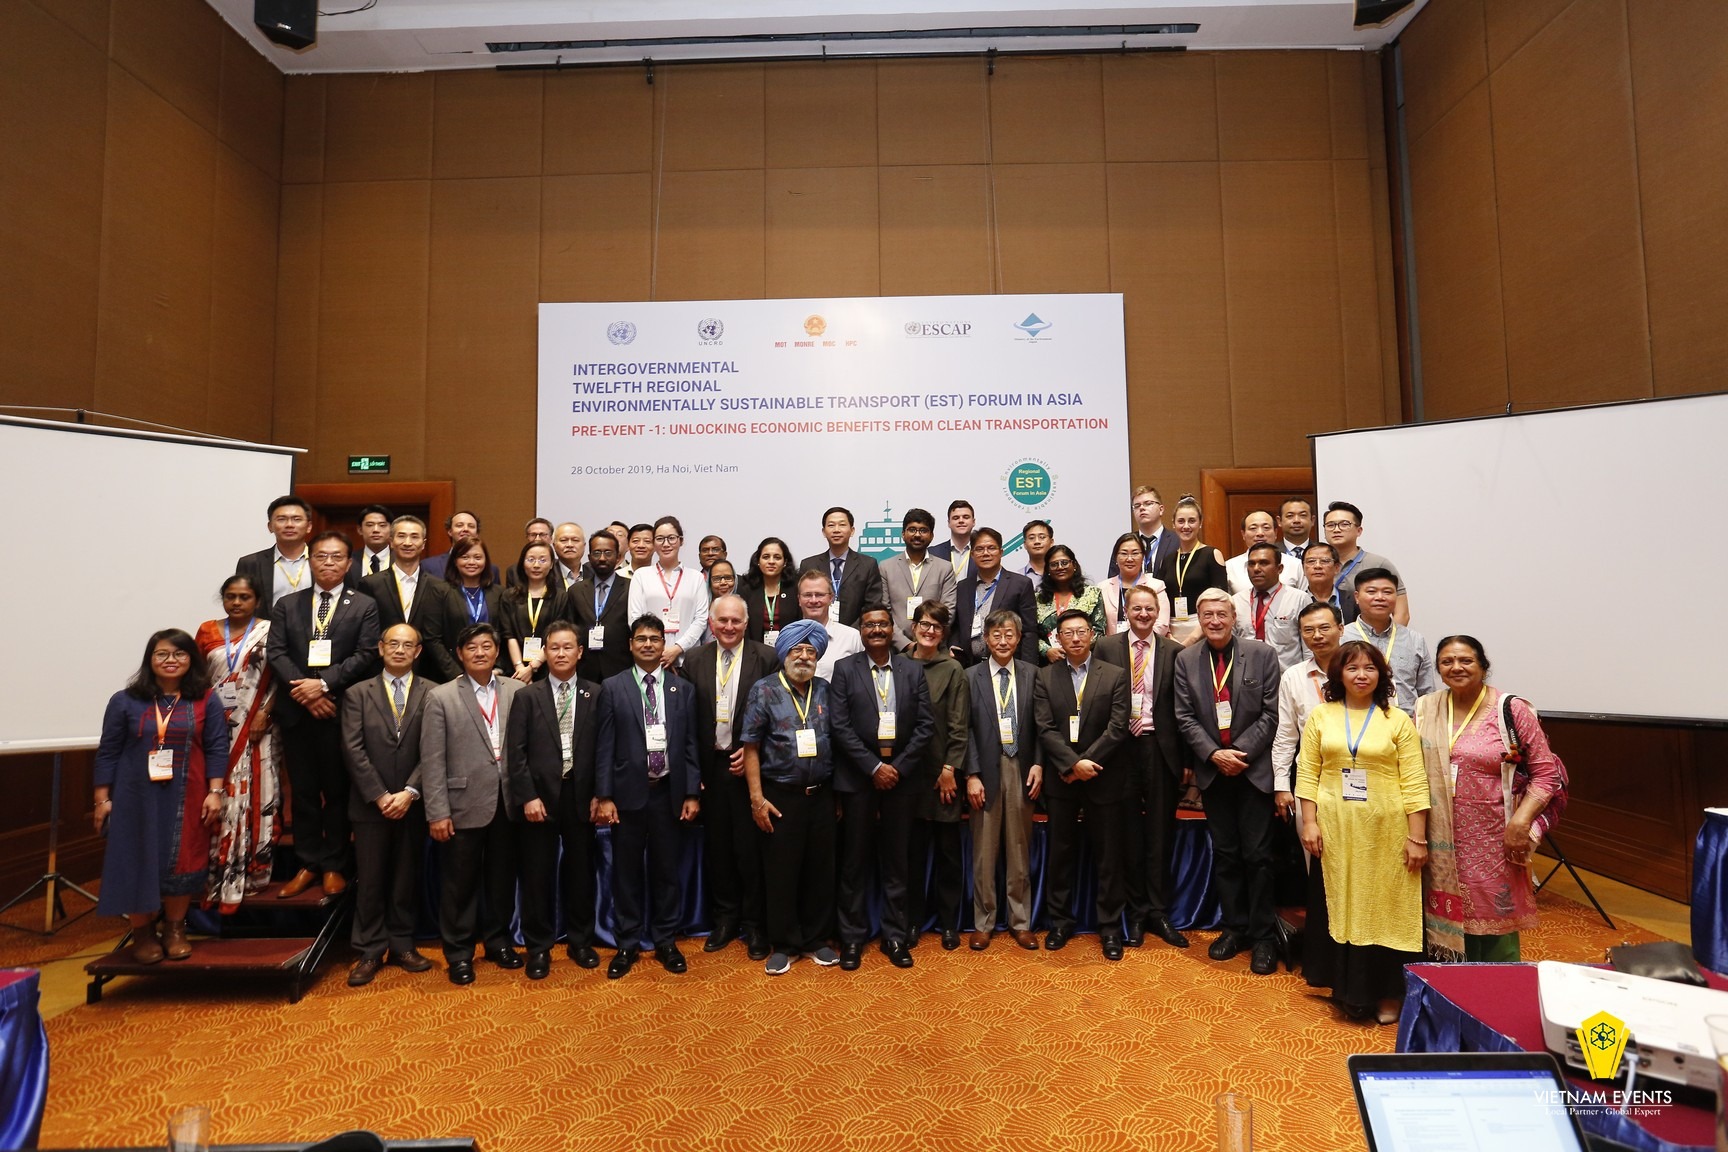 The 12th Intergovernmental Regional Environmentally Sustainable Transport (EST) Forum in Asia